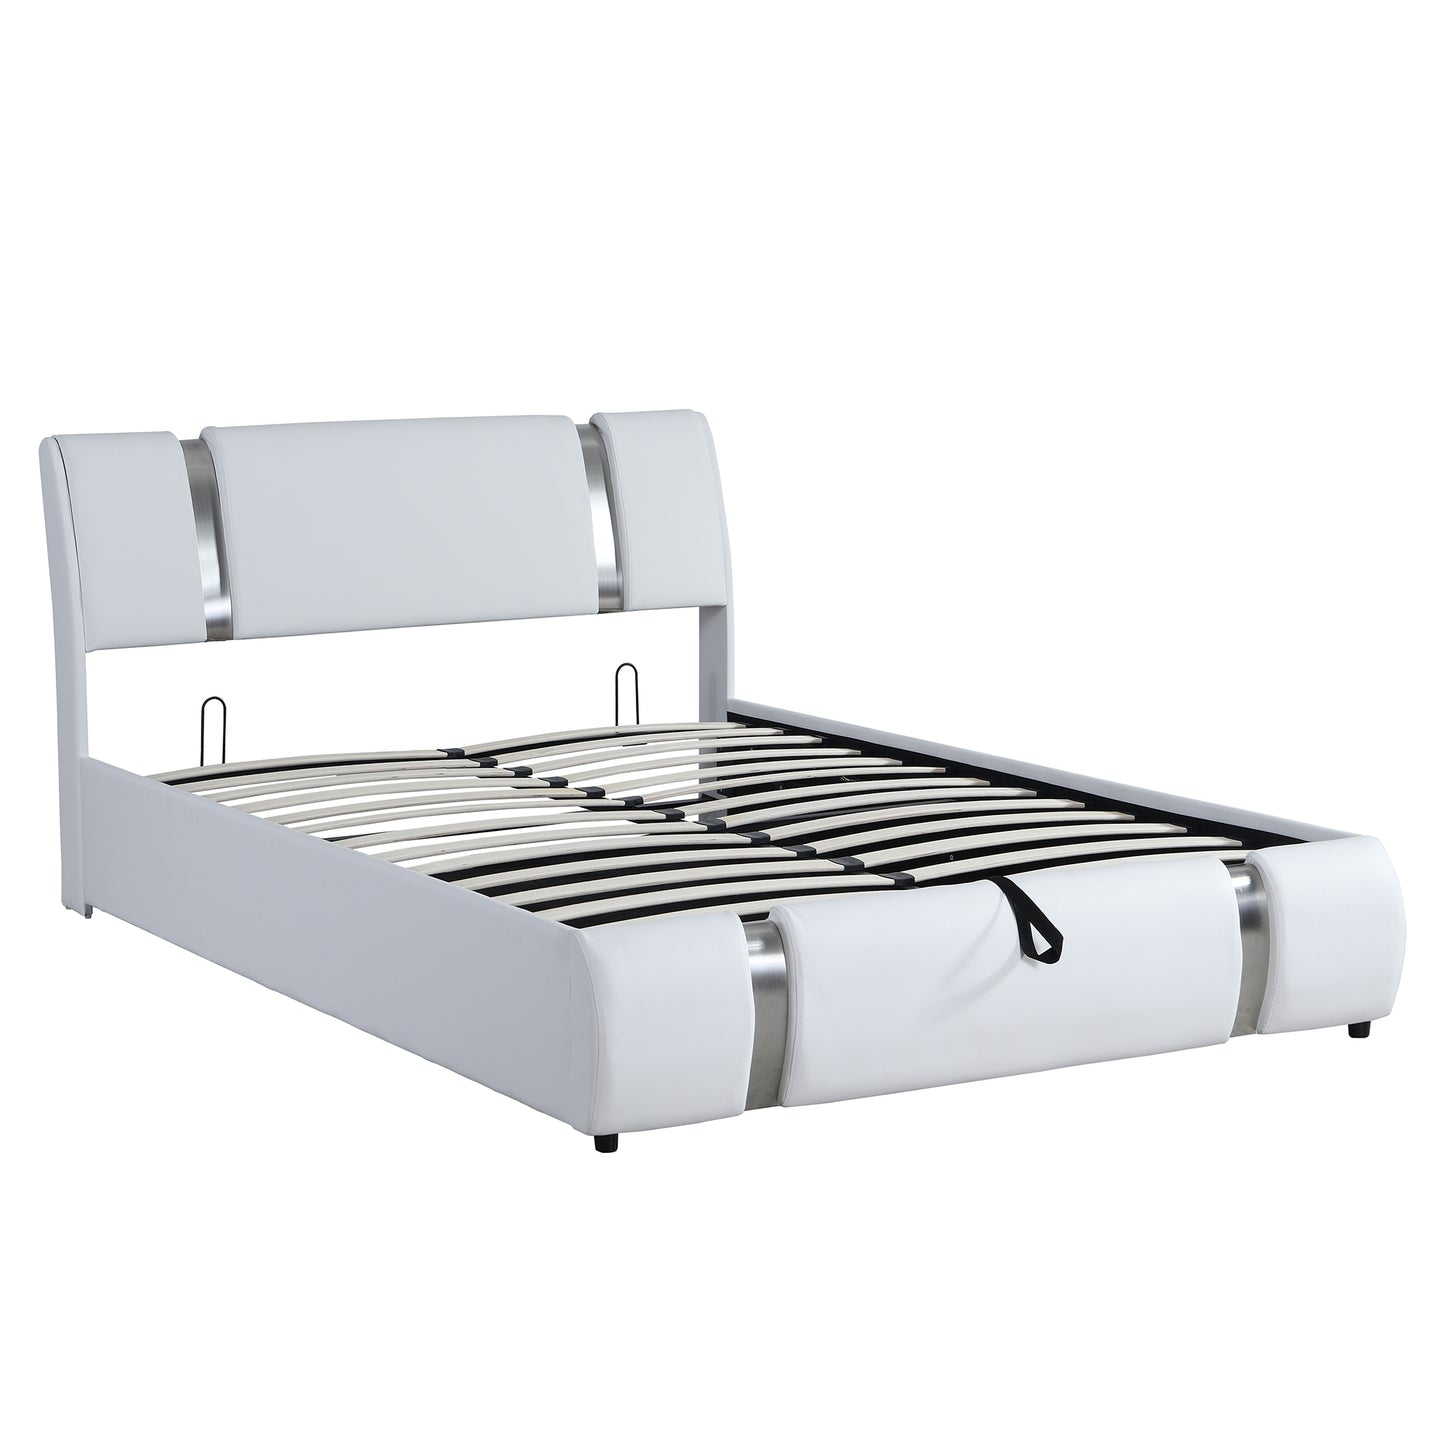 Queen Size Upholstered Faux Leather Platform bed with a Hydraulic Storage System, White